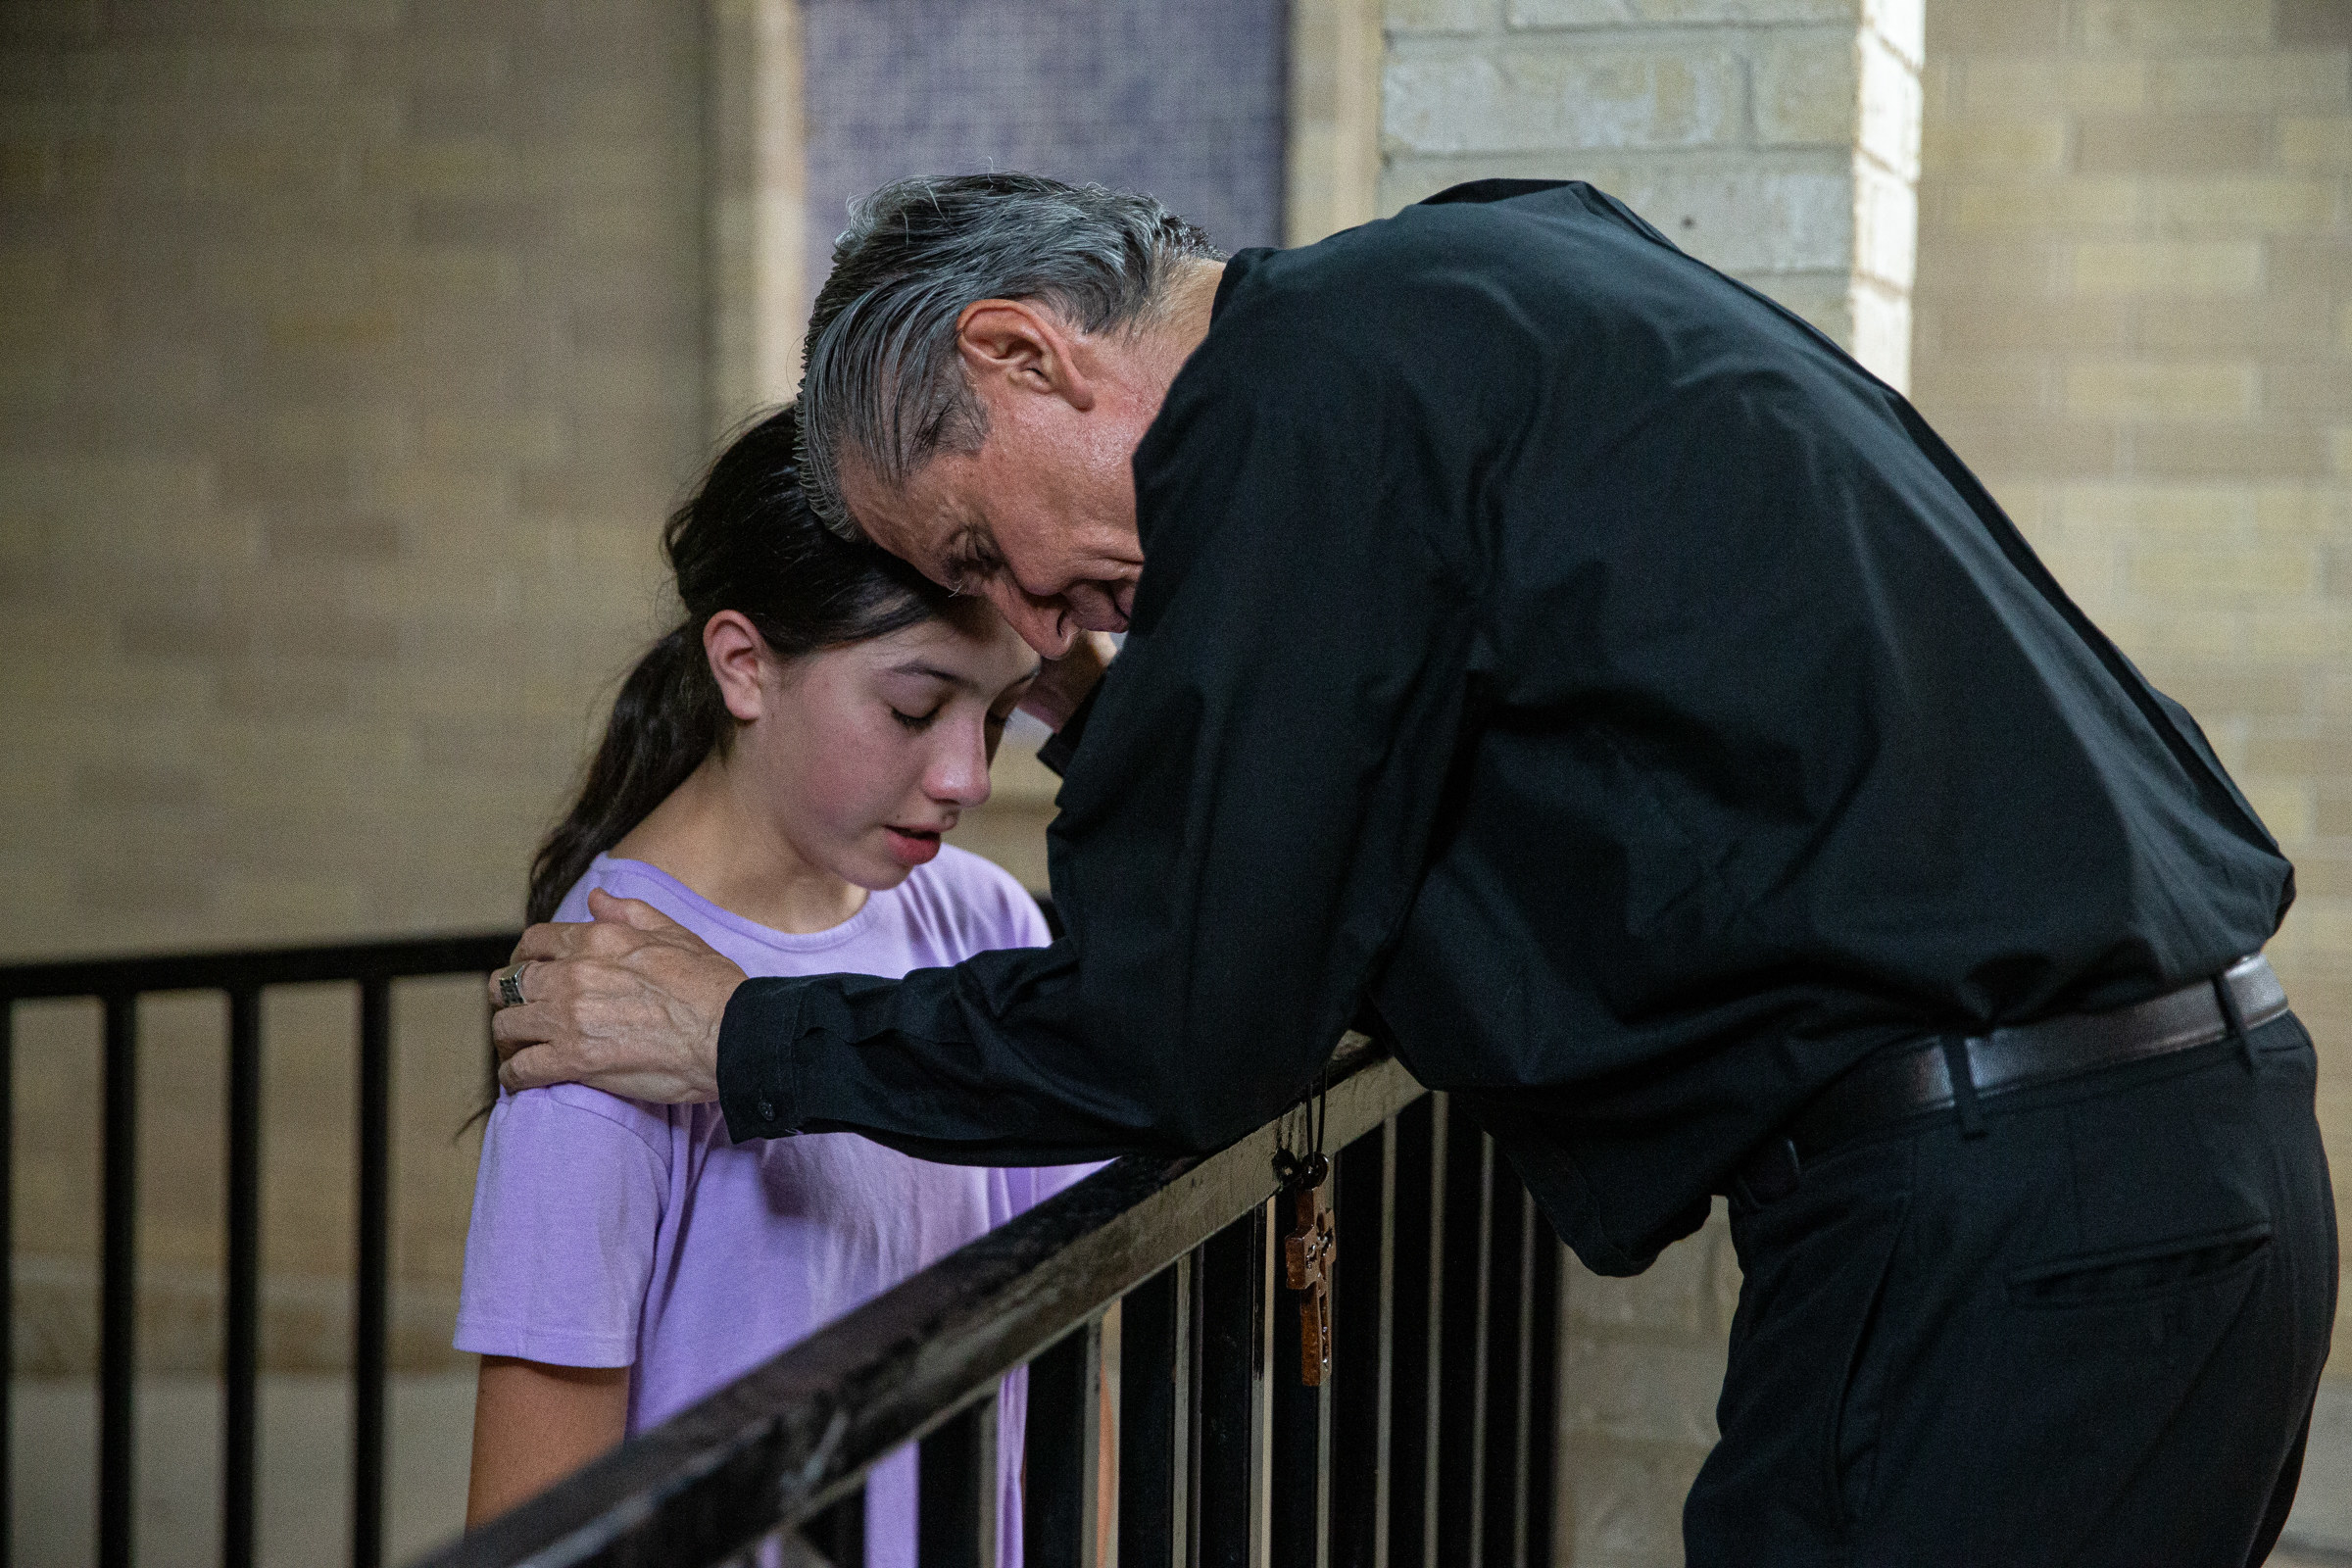 A man wearing all black leans over a gate and holds the shoulder of a young girl, as both pray